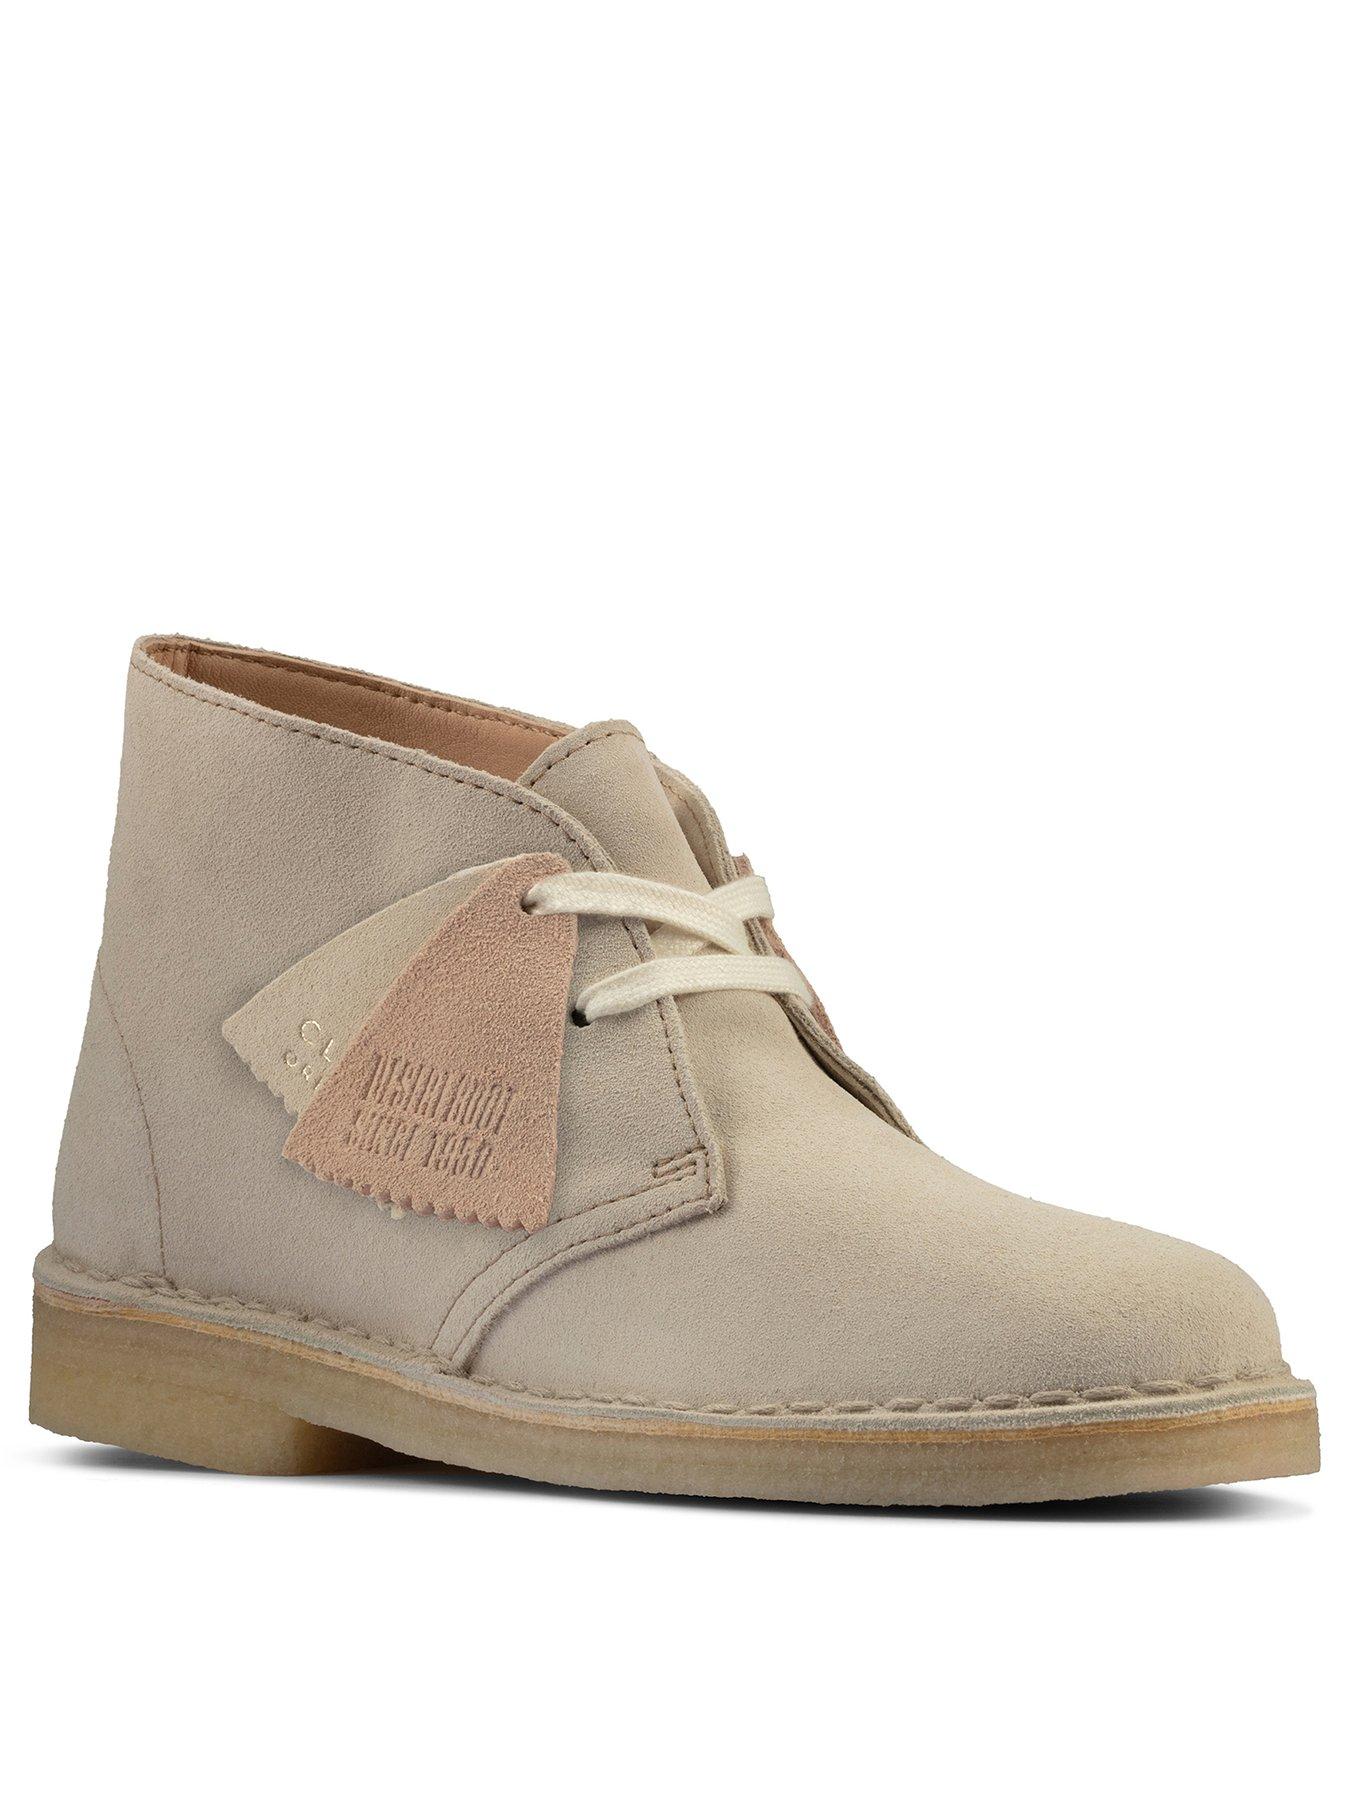 Clarks Clearance | Clarks Outlet | Very 